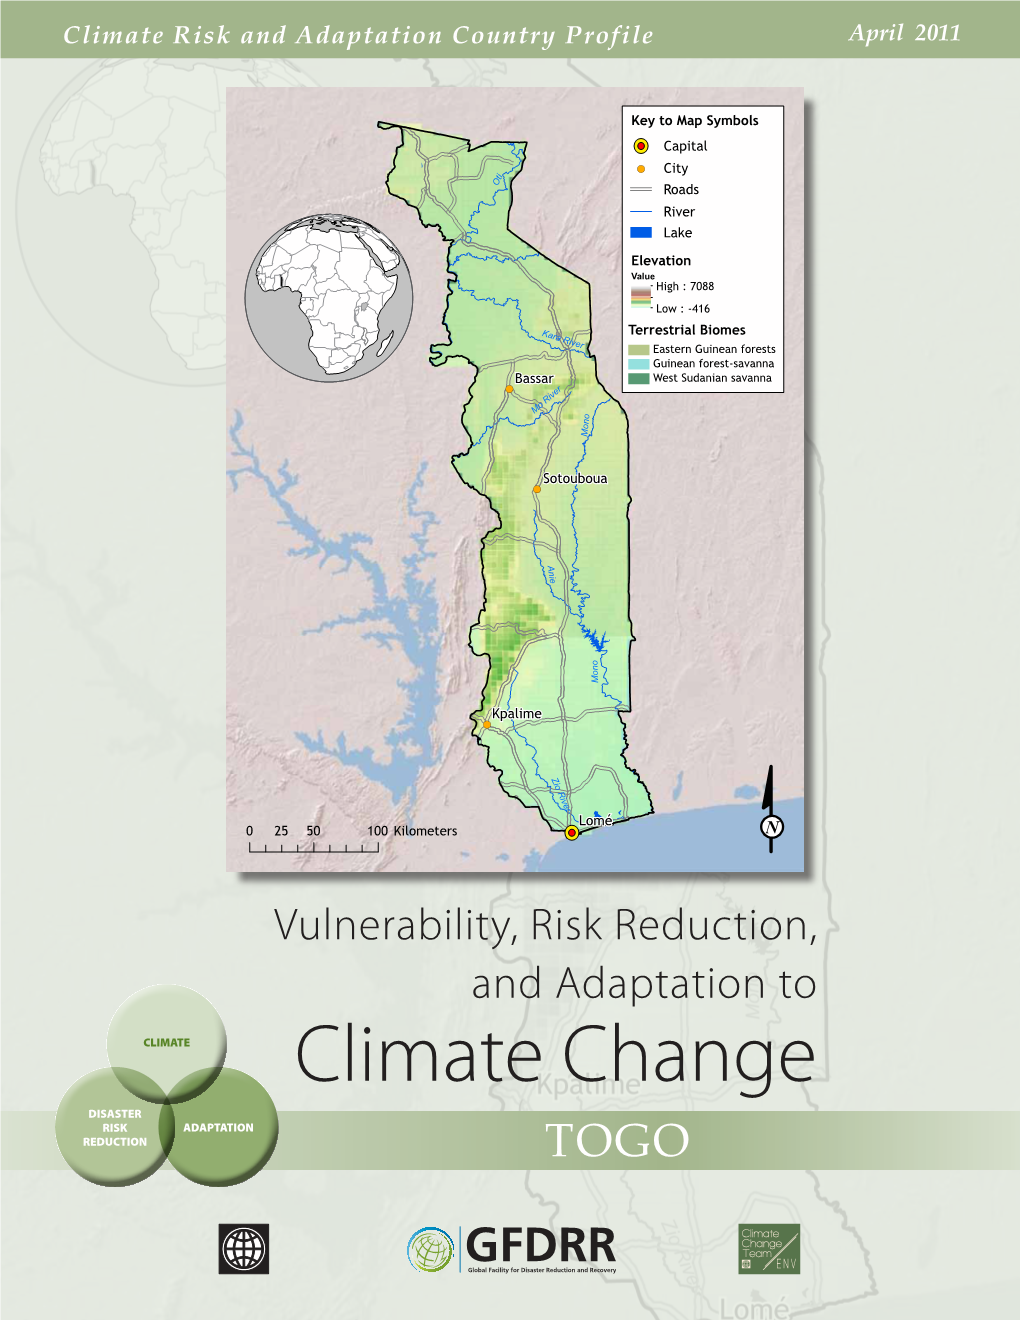 Climate Change DISASTER RISK ADAPTATION REDUCTION TOGO